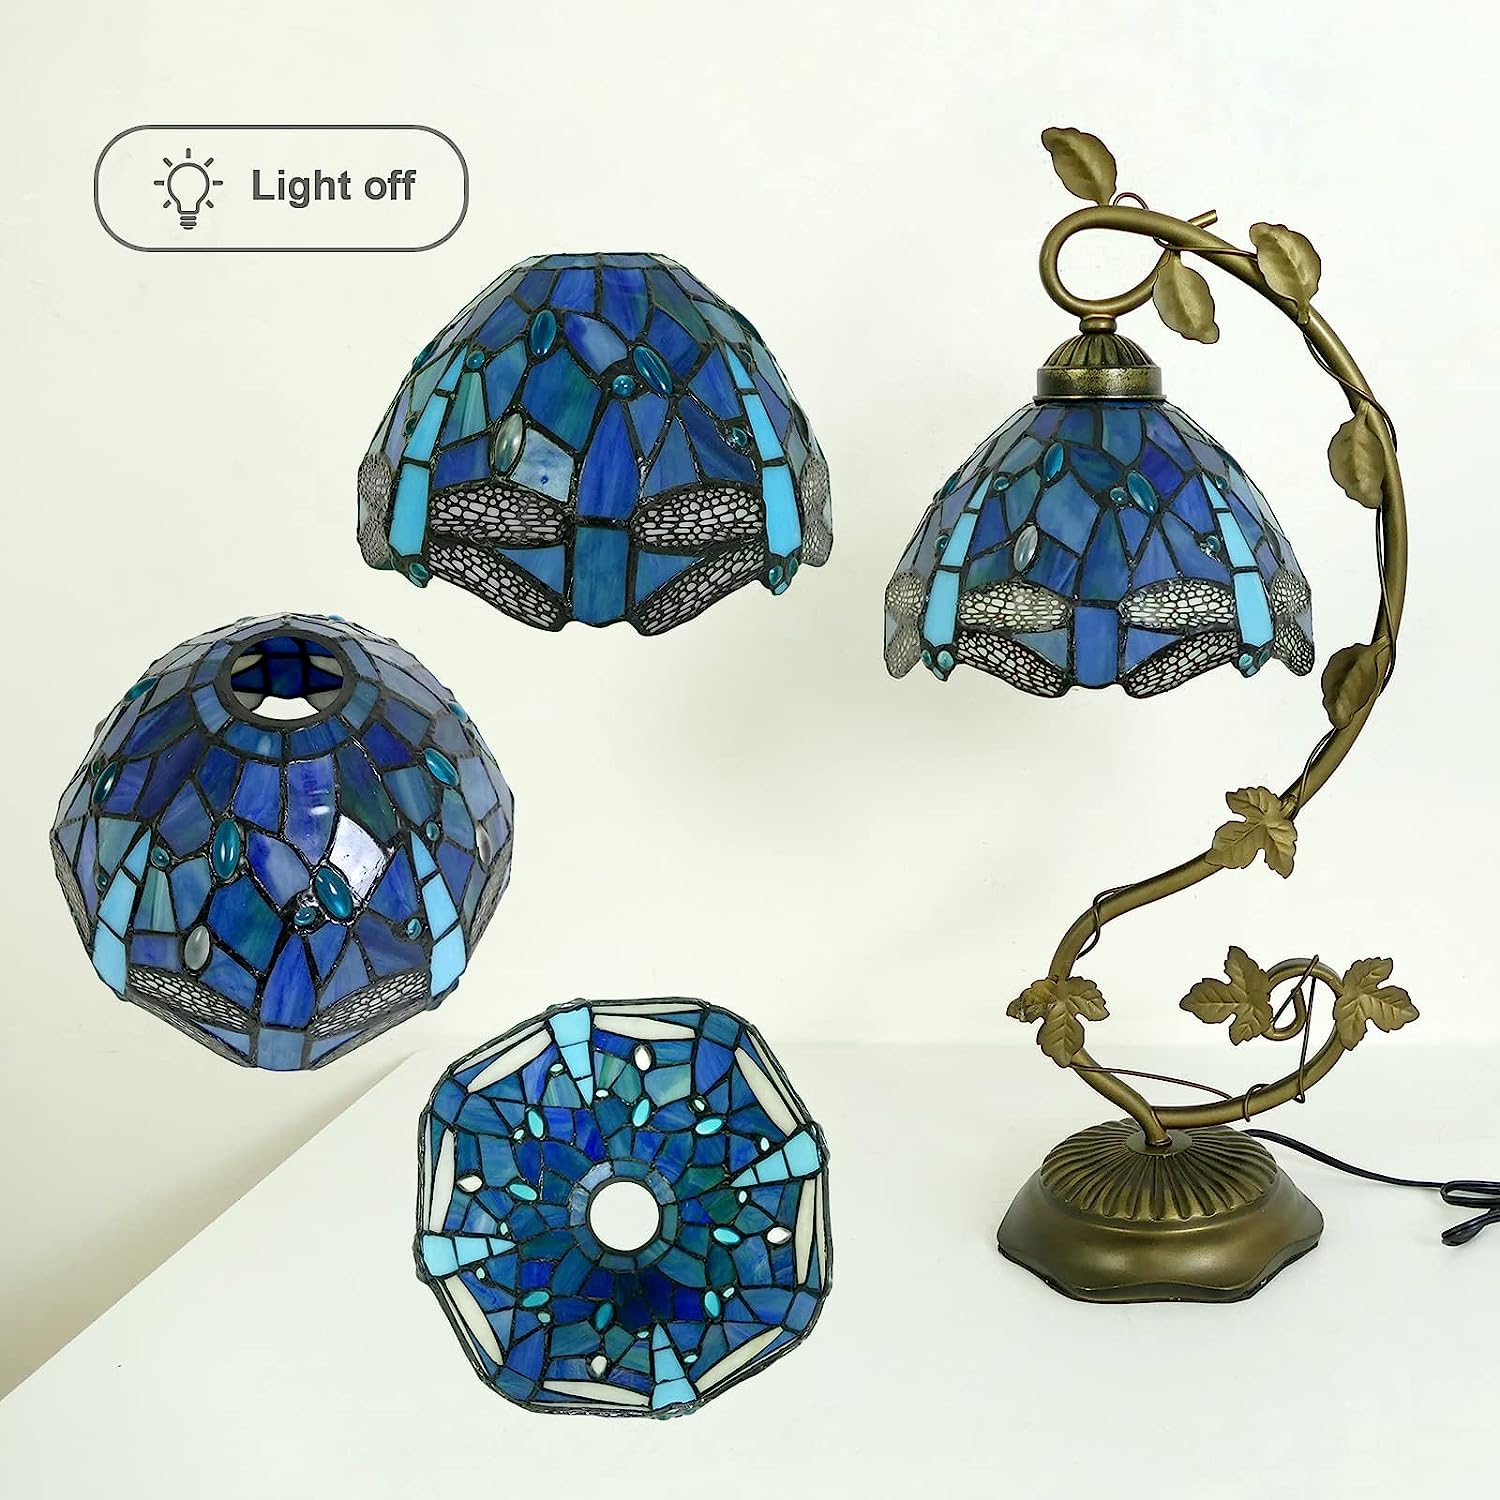 SHADY  Style Table Lamp 8x10x21 Inch Sea Blue Dragonfly Handmade Stained Glass Desk Lamp with Metal Leaf Iron Decor Vintage Curved Reading Light for Bedside  Living Room  Office (L